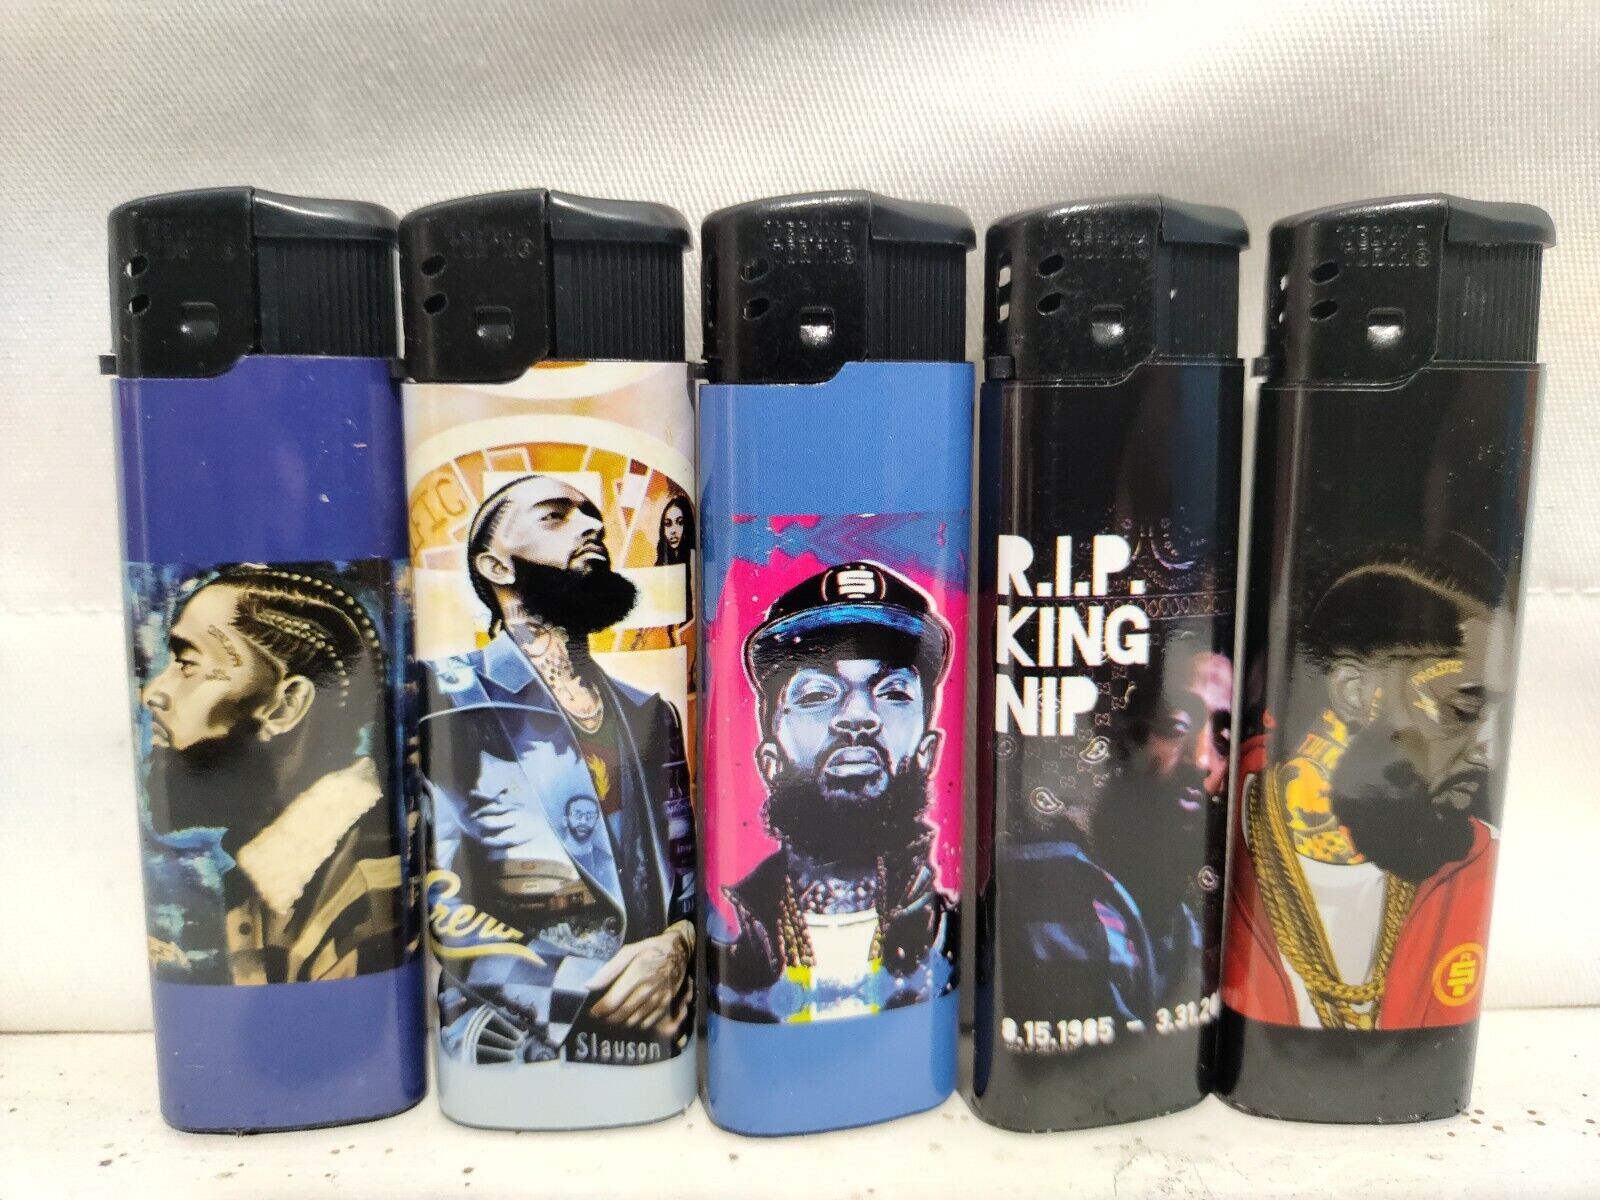 10 Count Electronic ignition Nipsey Hussle Hustle DISPOSABLE Gas Lighters